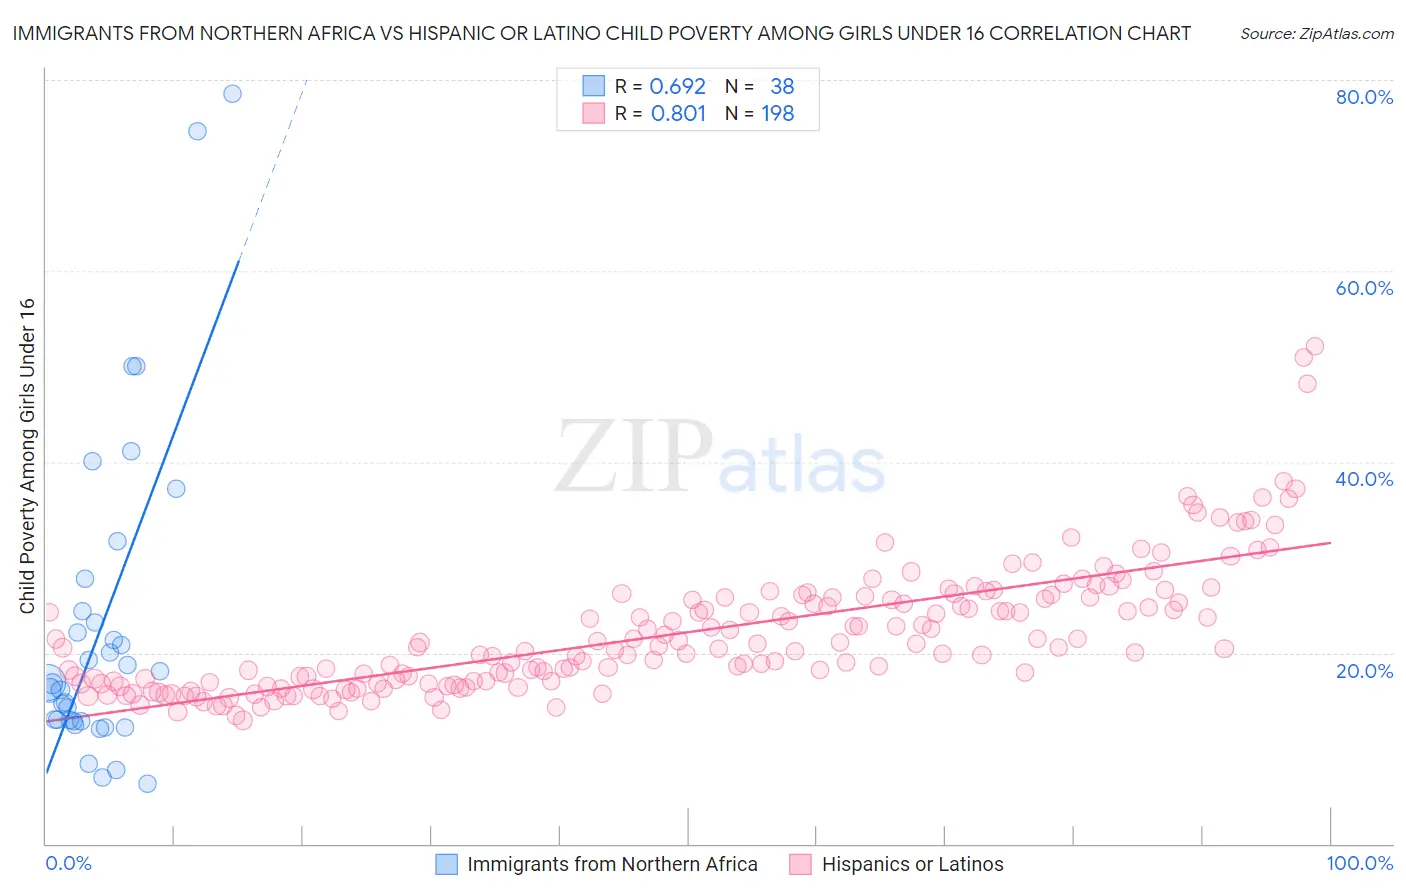 Immigrants from Northern Africa vs Hispanic or Latino Child Poverty Among Girls Under 16